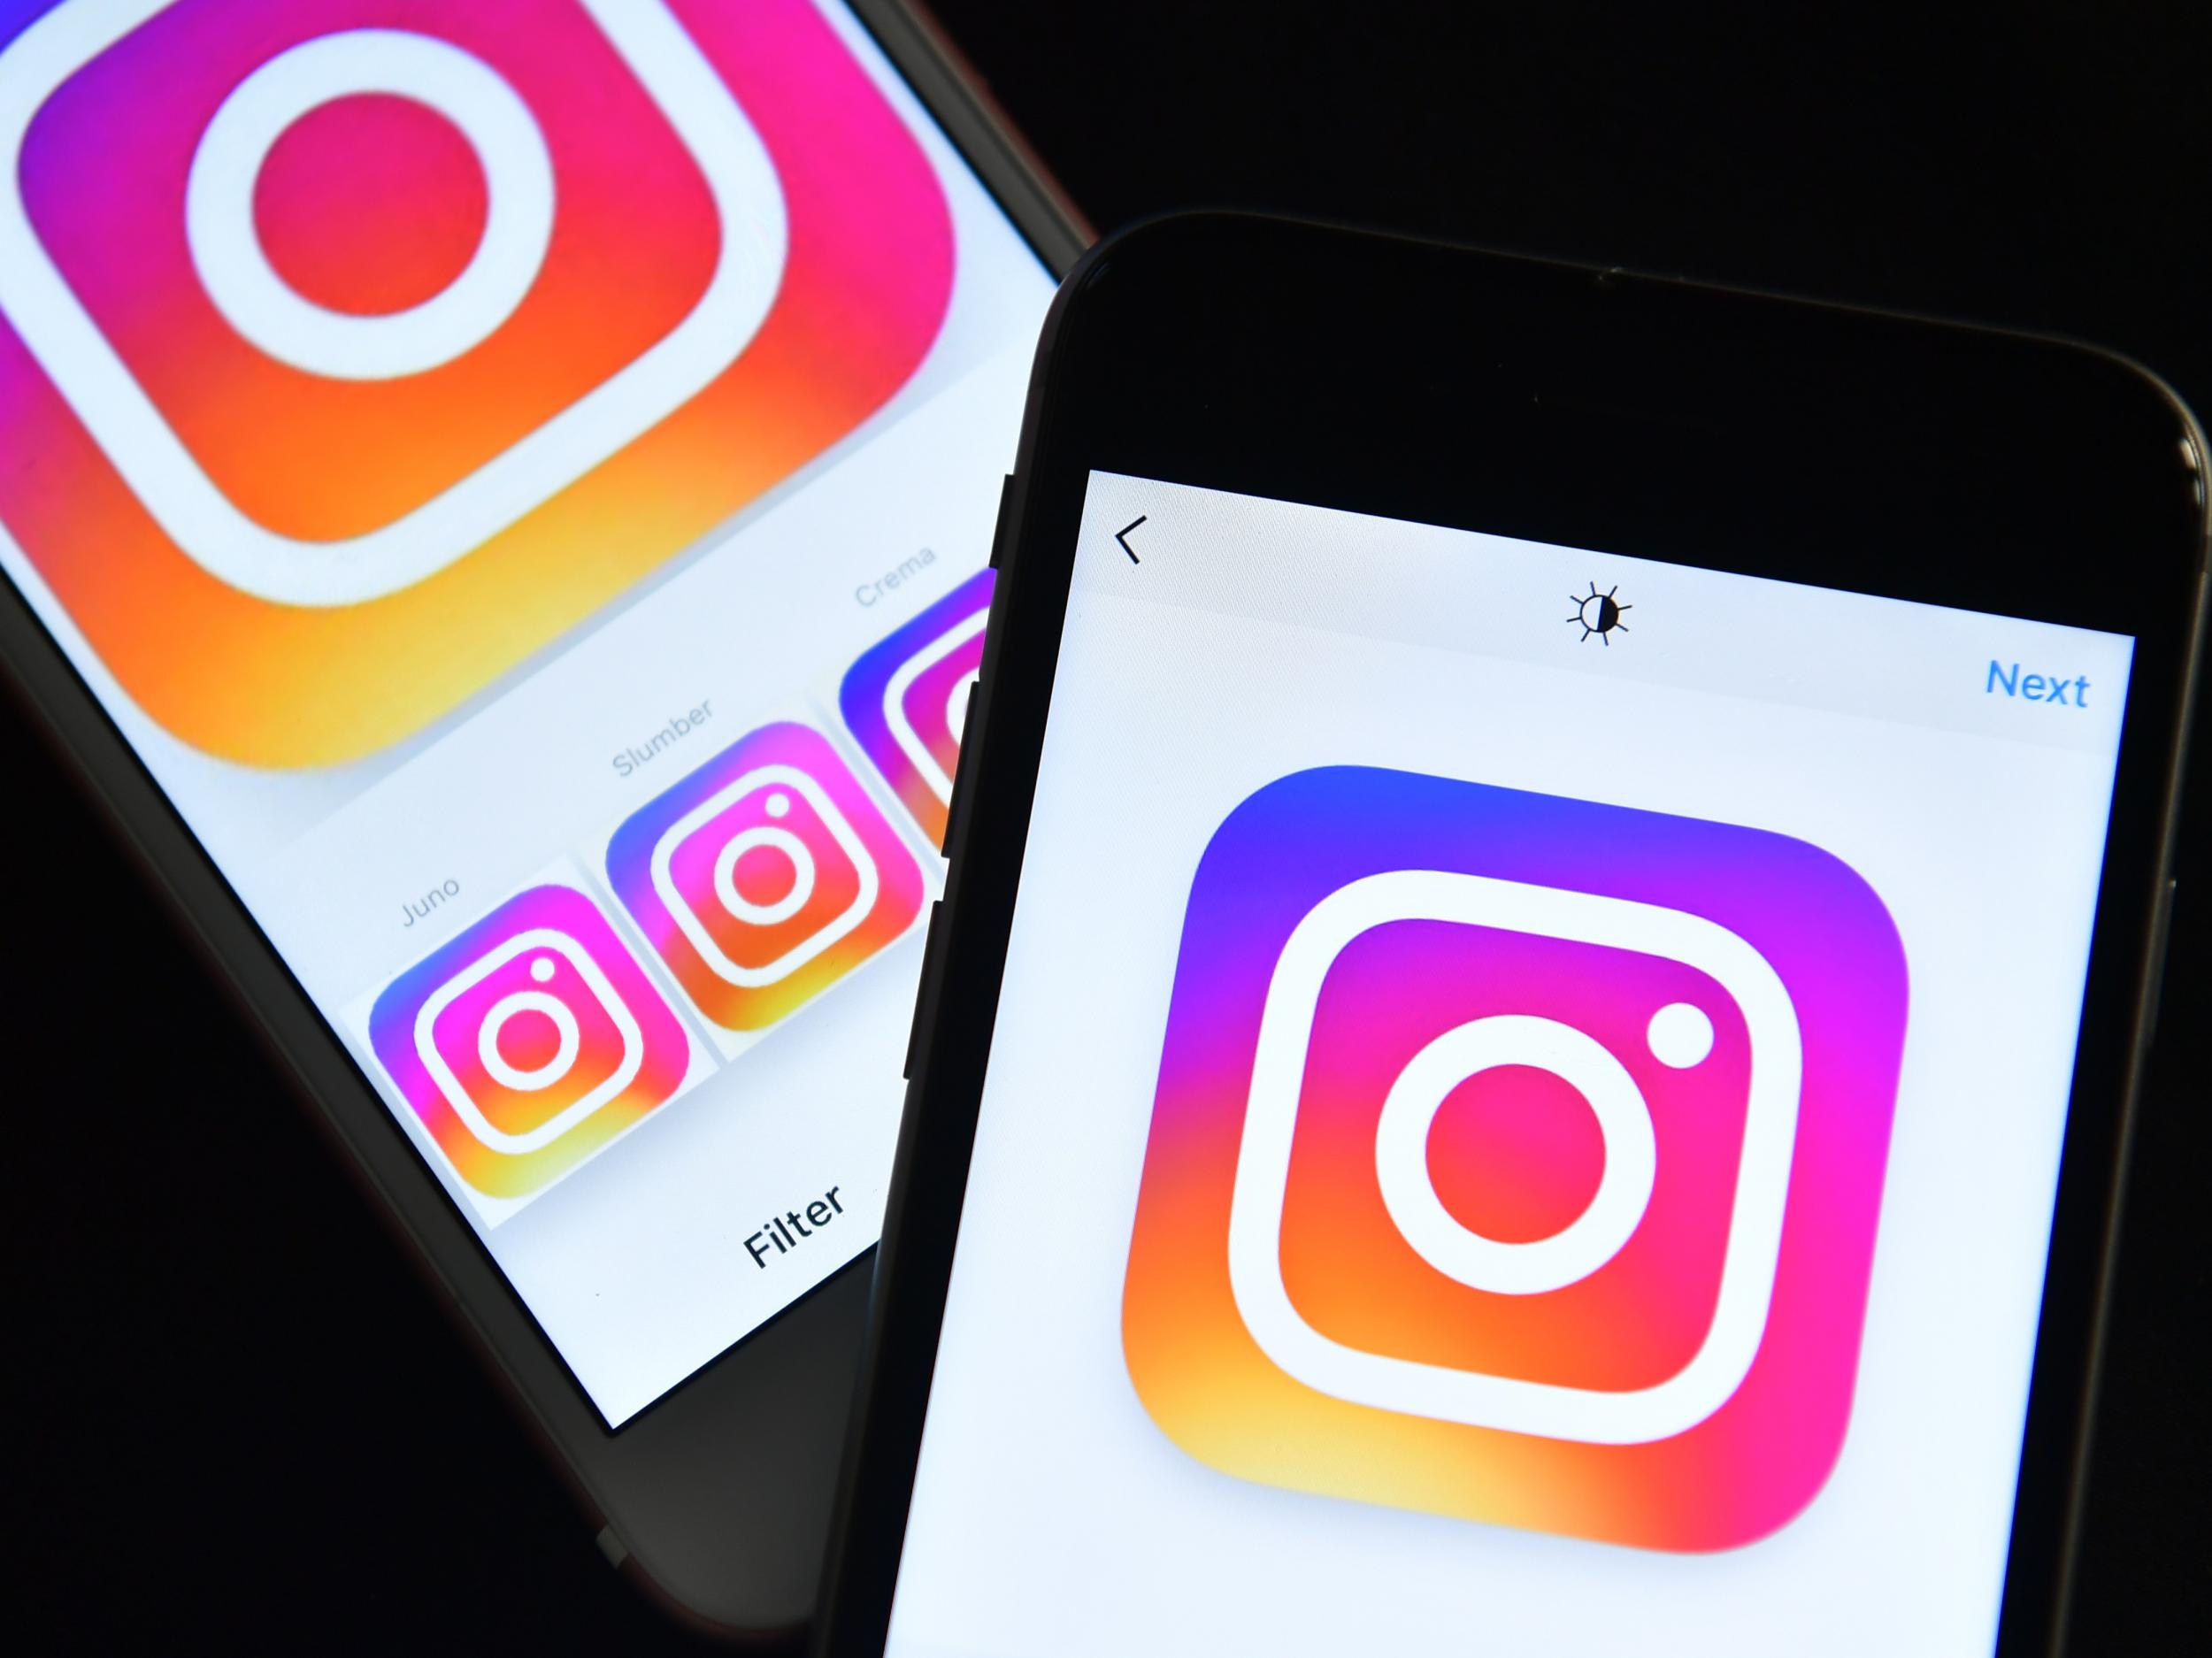 Instagram's new feature Reels is the social media platform's latest attempt to take on Chinese app TikTok